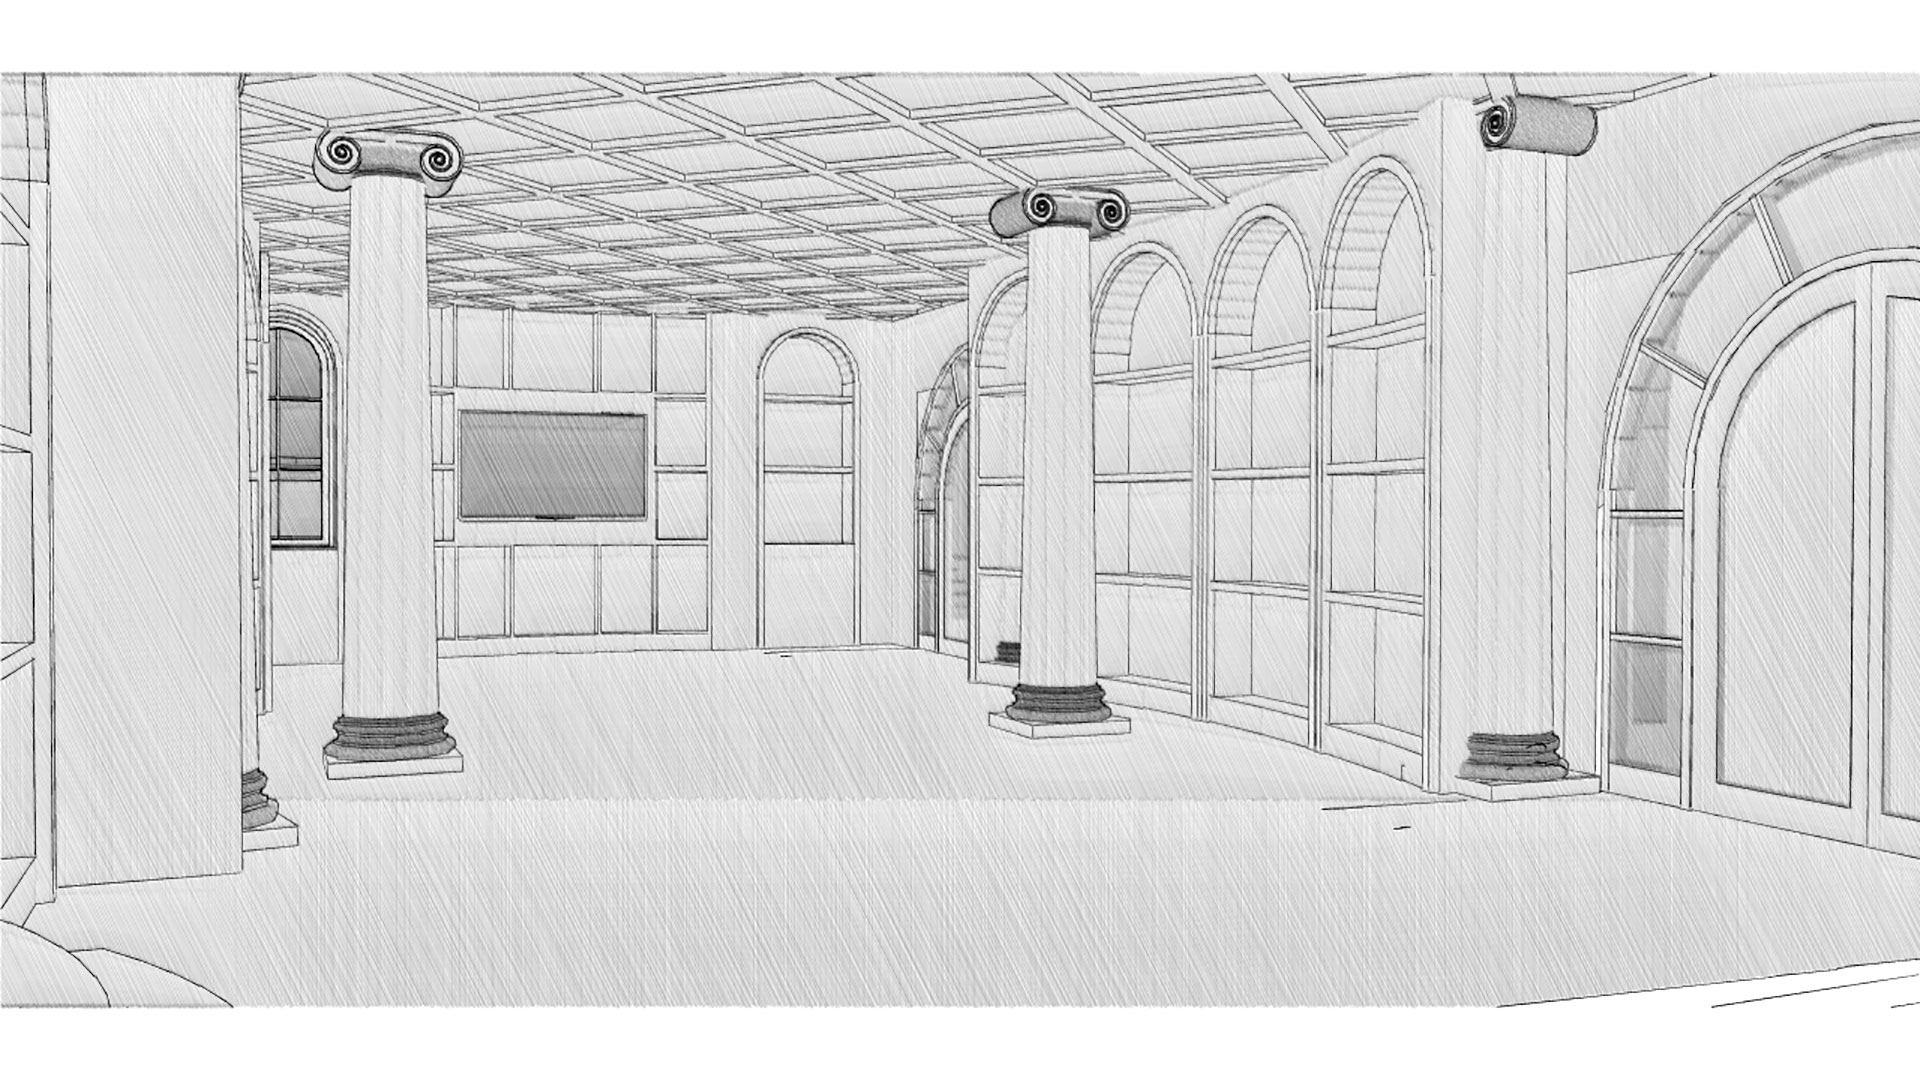 Black and white pencil drawing of library with columns and paneled ceiling.